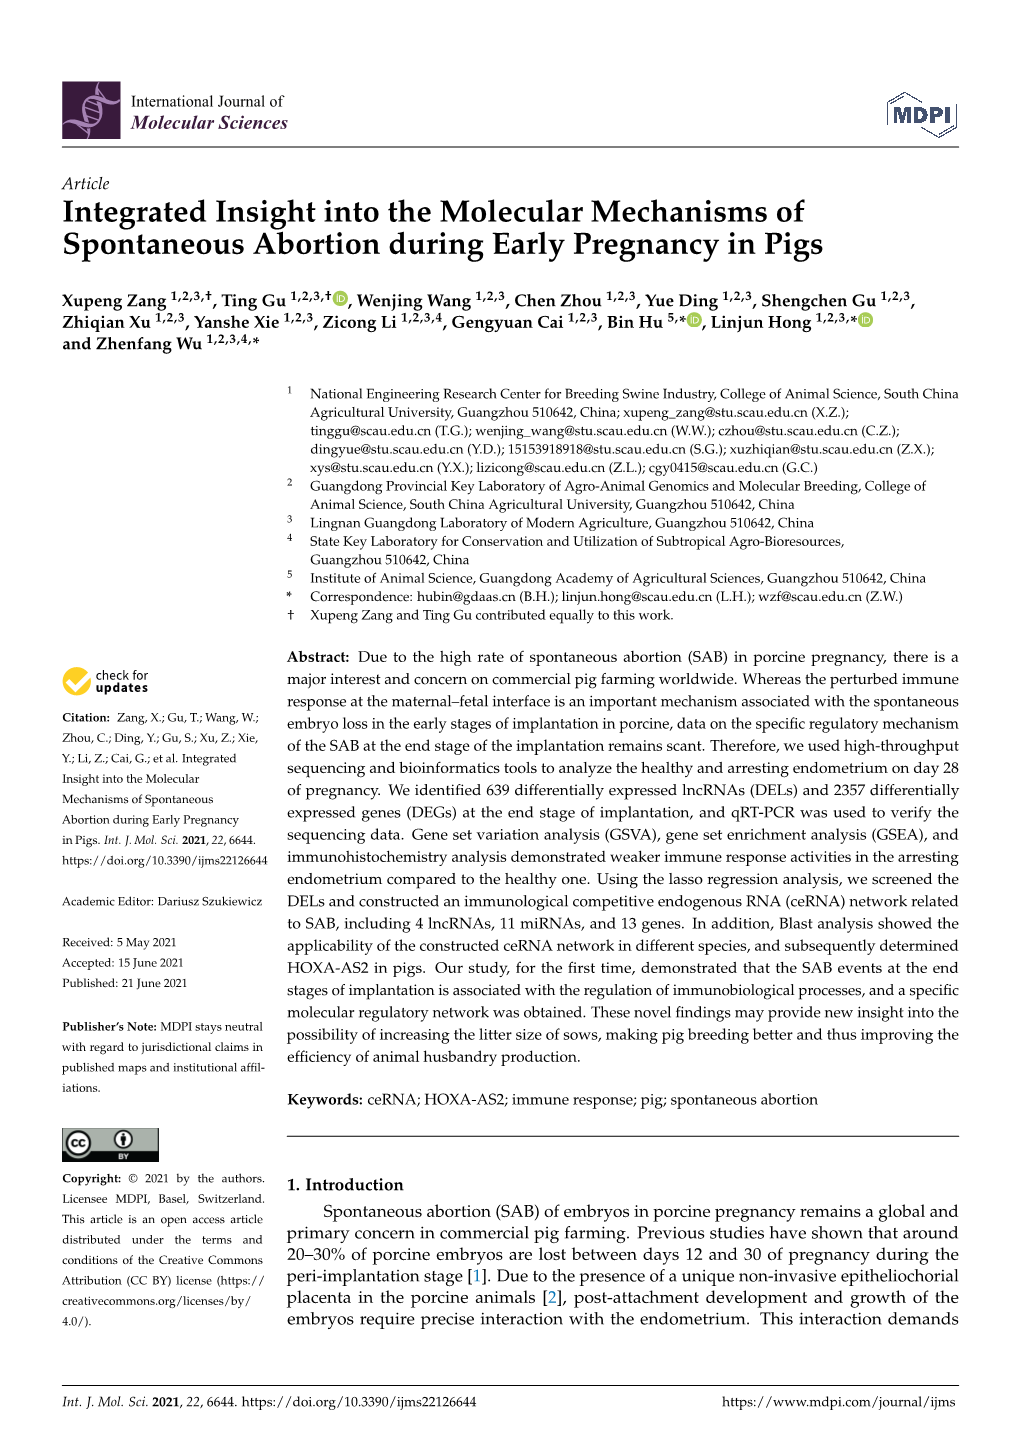 Integrated Insight Into the Molecular Mechanisms of Spontaneous Abortion During Early Pregnancy in Pigs